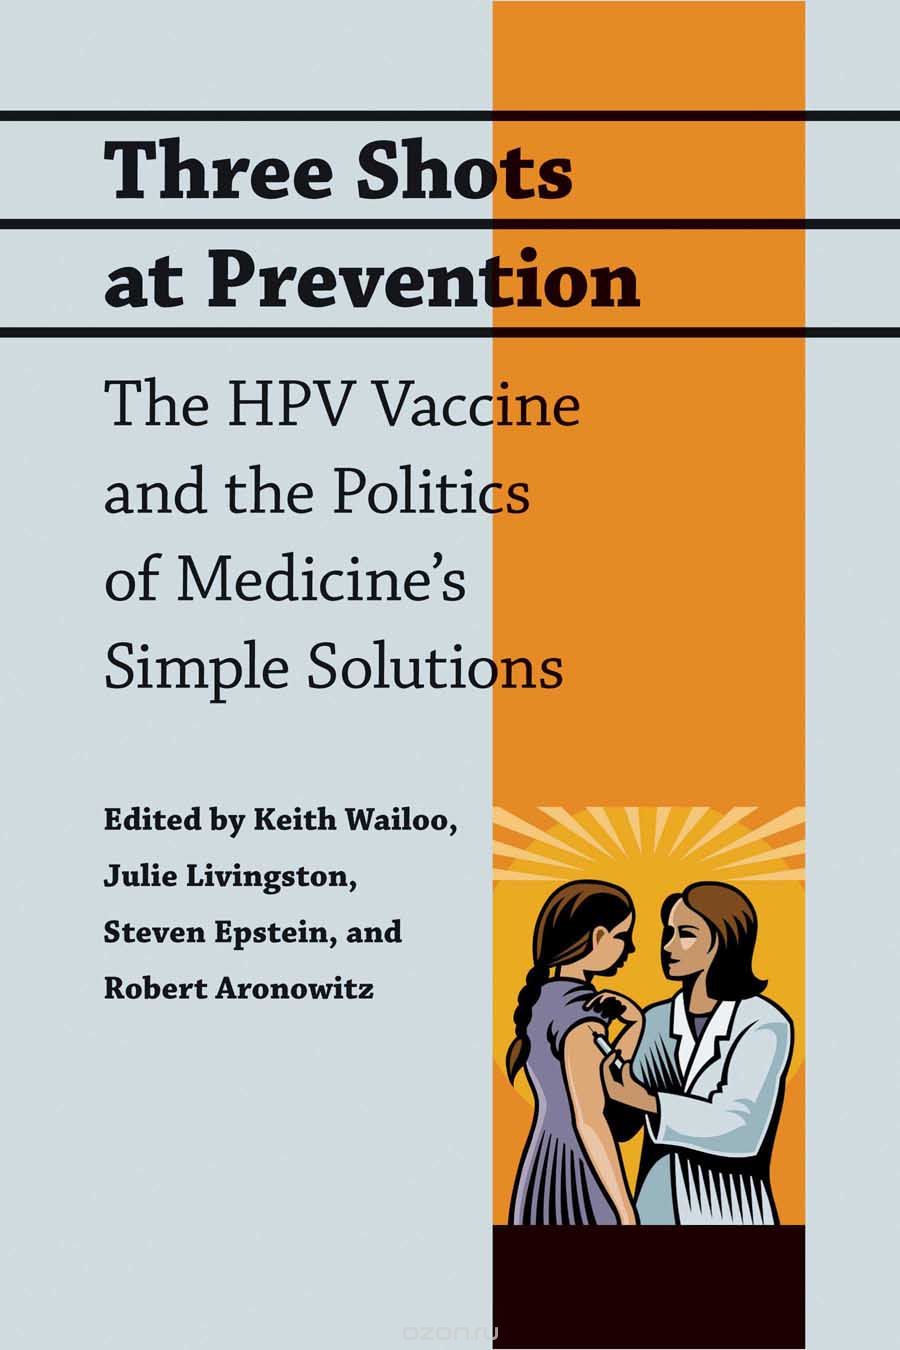 Скачать книгу "Three Shots at Prevention – The HPV Vaccine and the Politics of Medicine?s Simple Solutions"